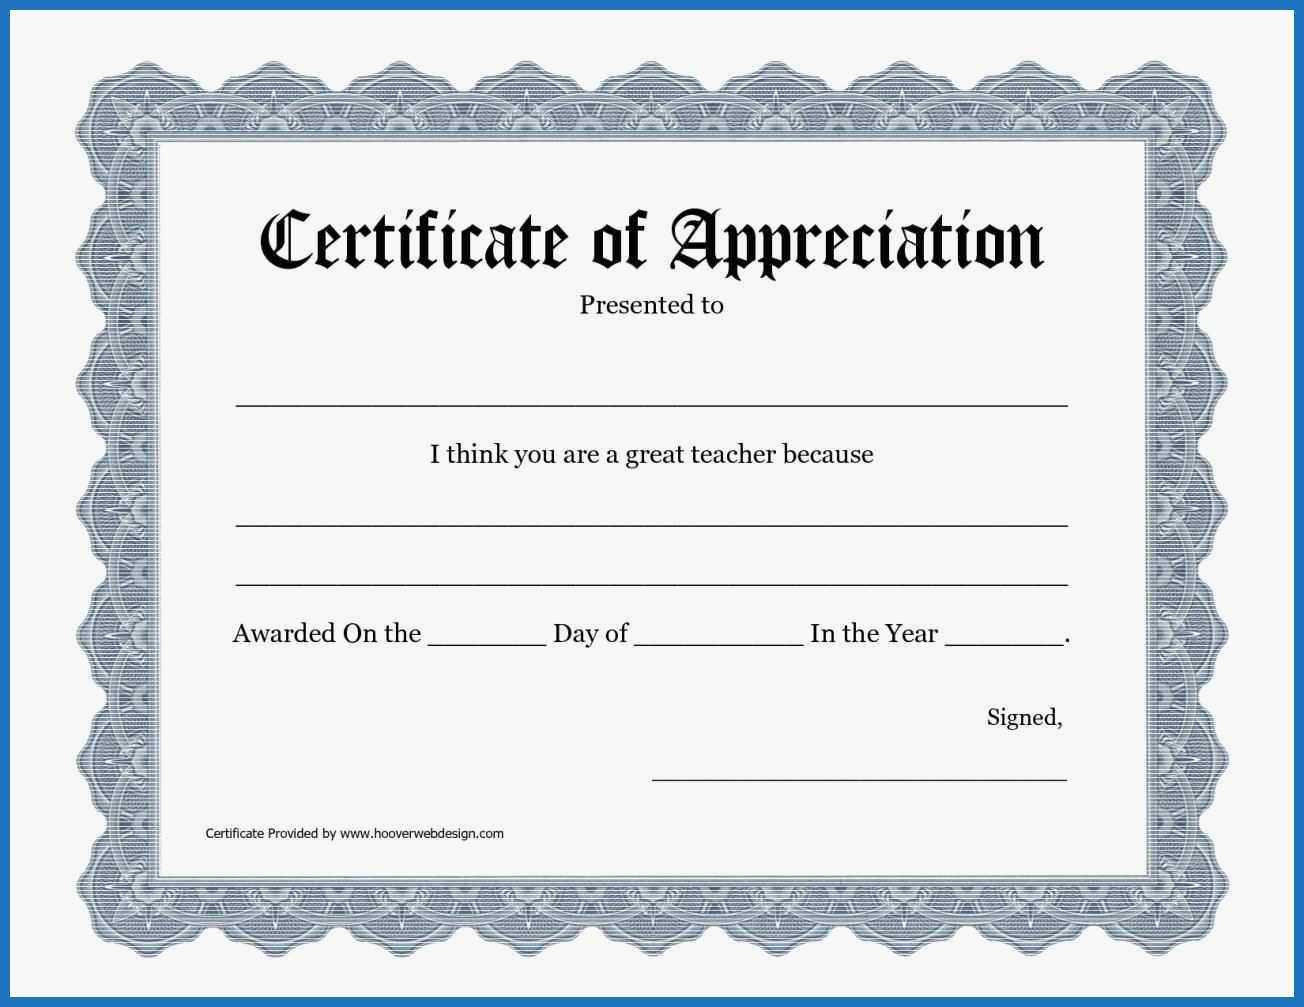 014 Recognition Certificate Templatee Ideas Of Appreciation With Blank Certificate Templates Free Download